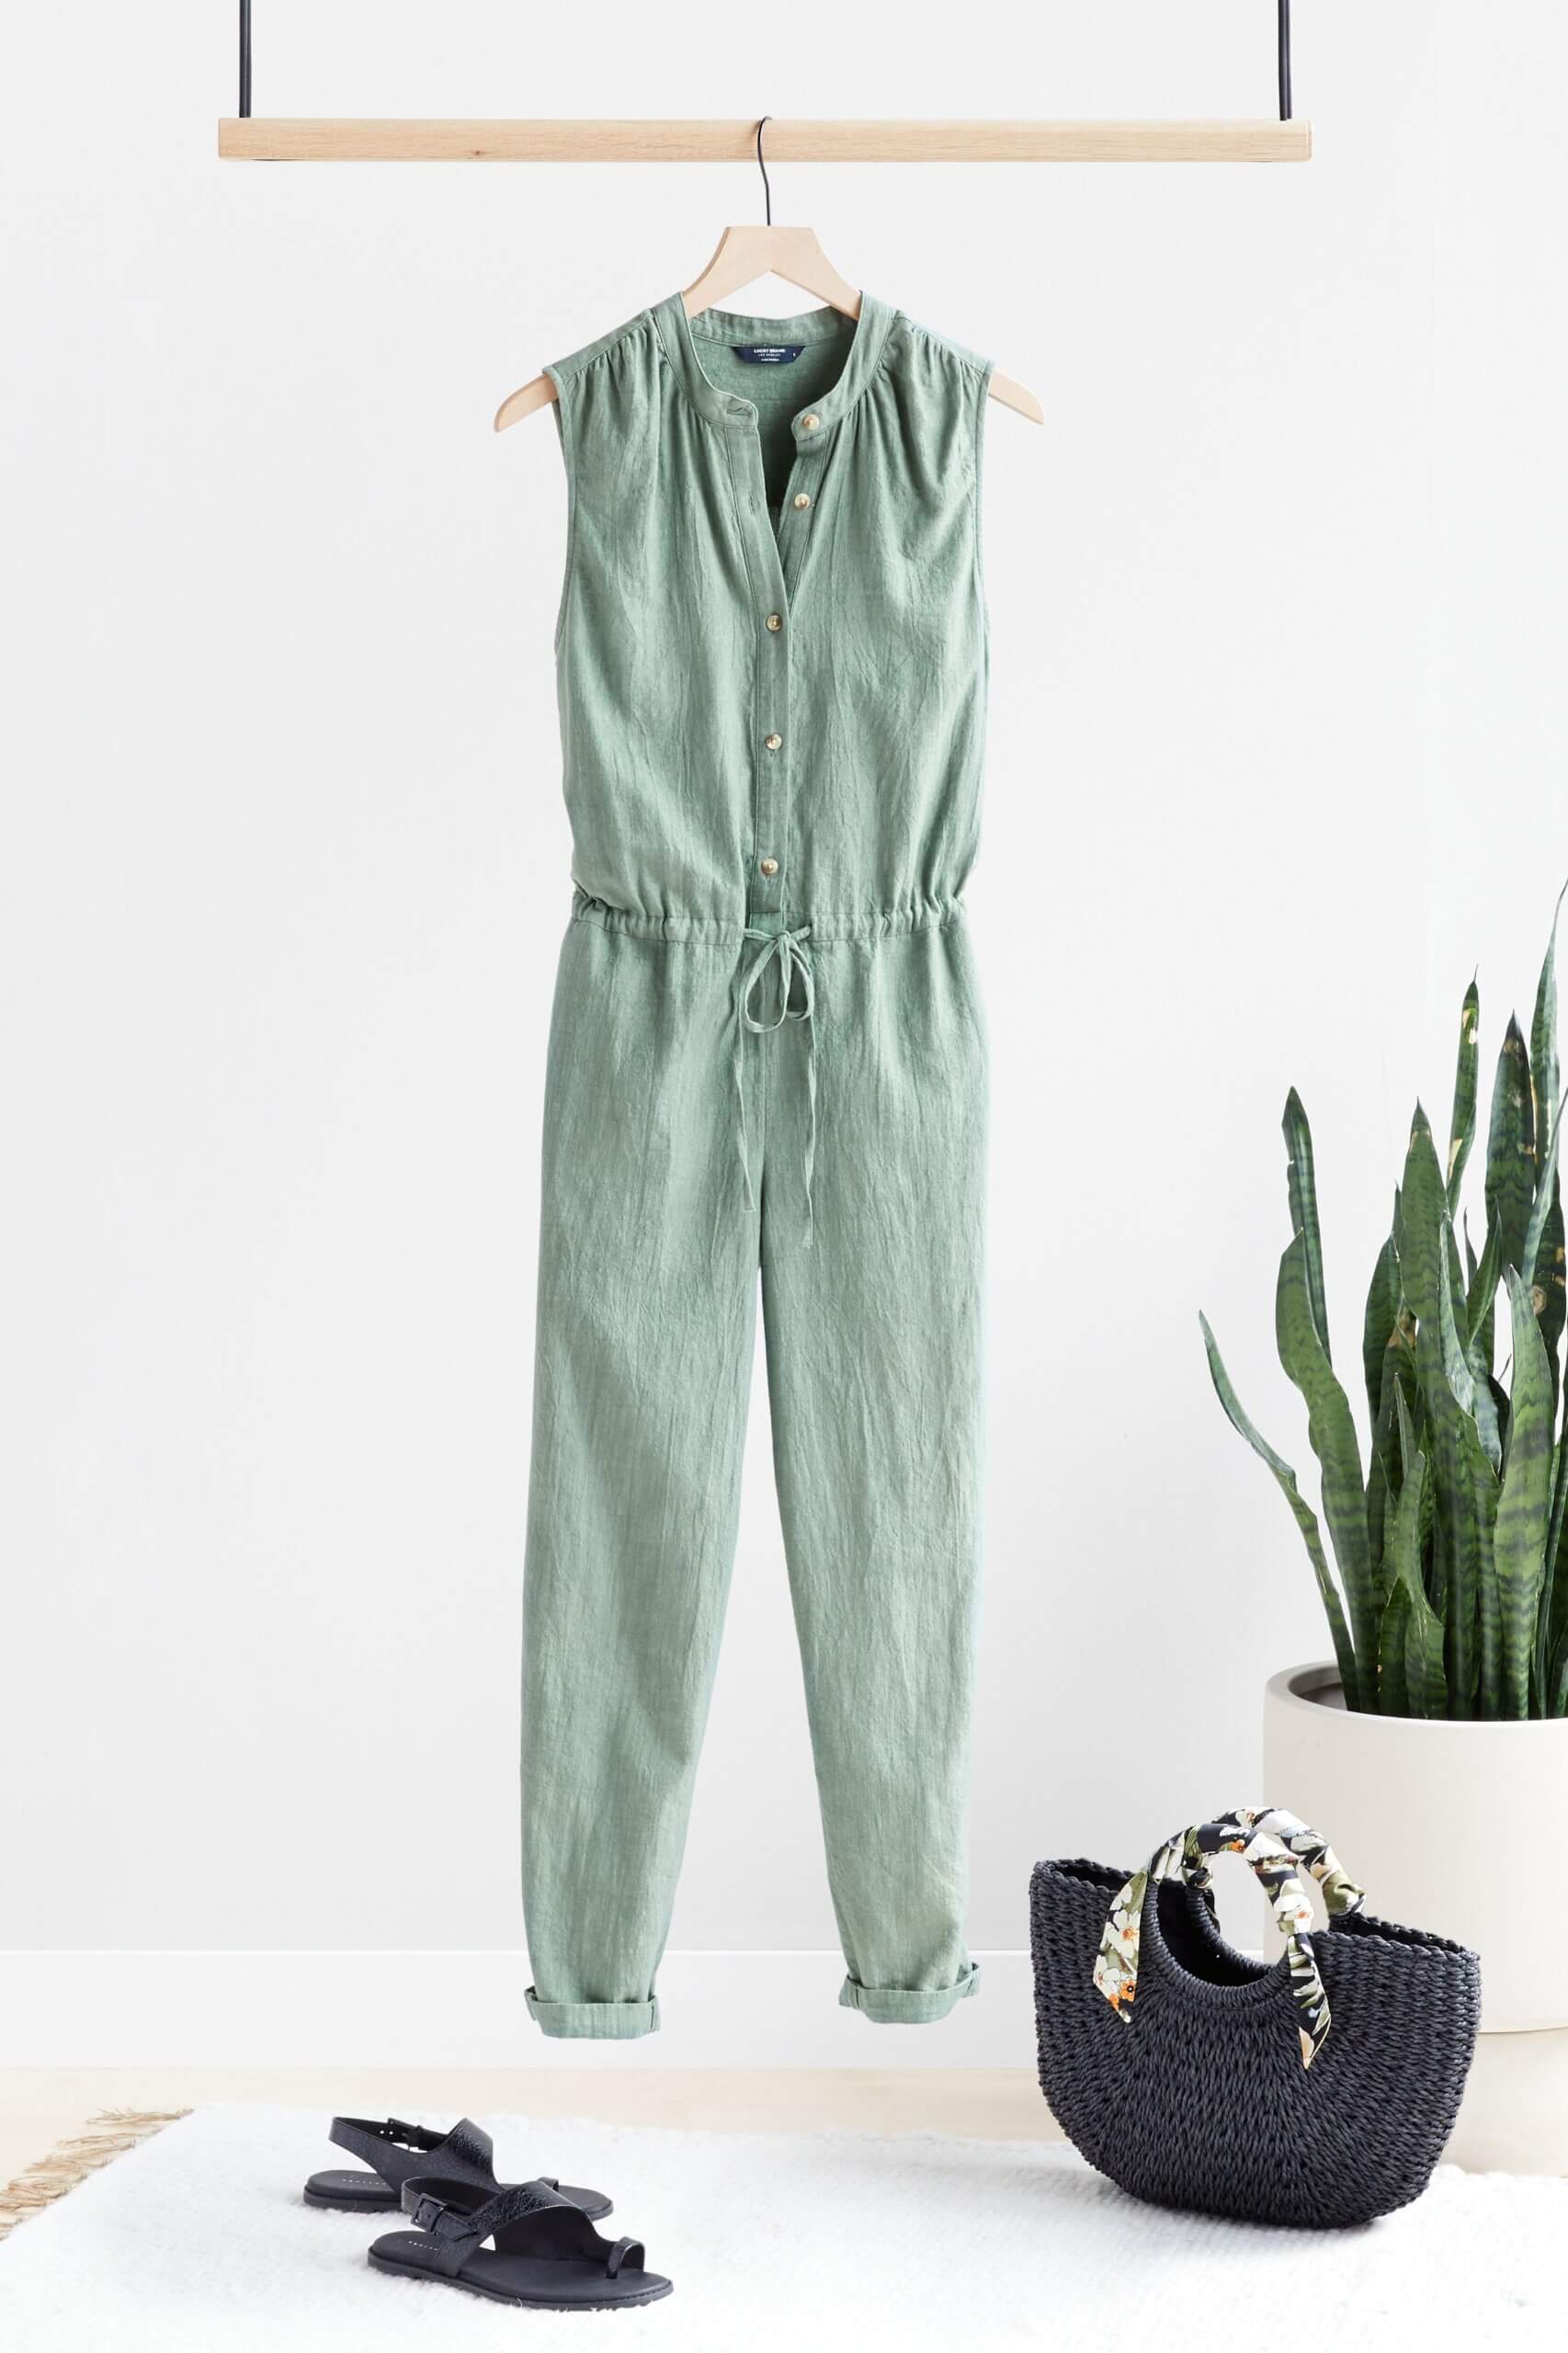 What Shoes to Wear with Jumpsuits?